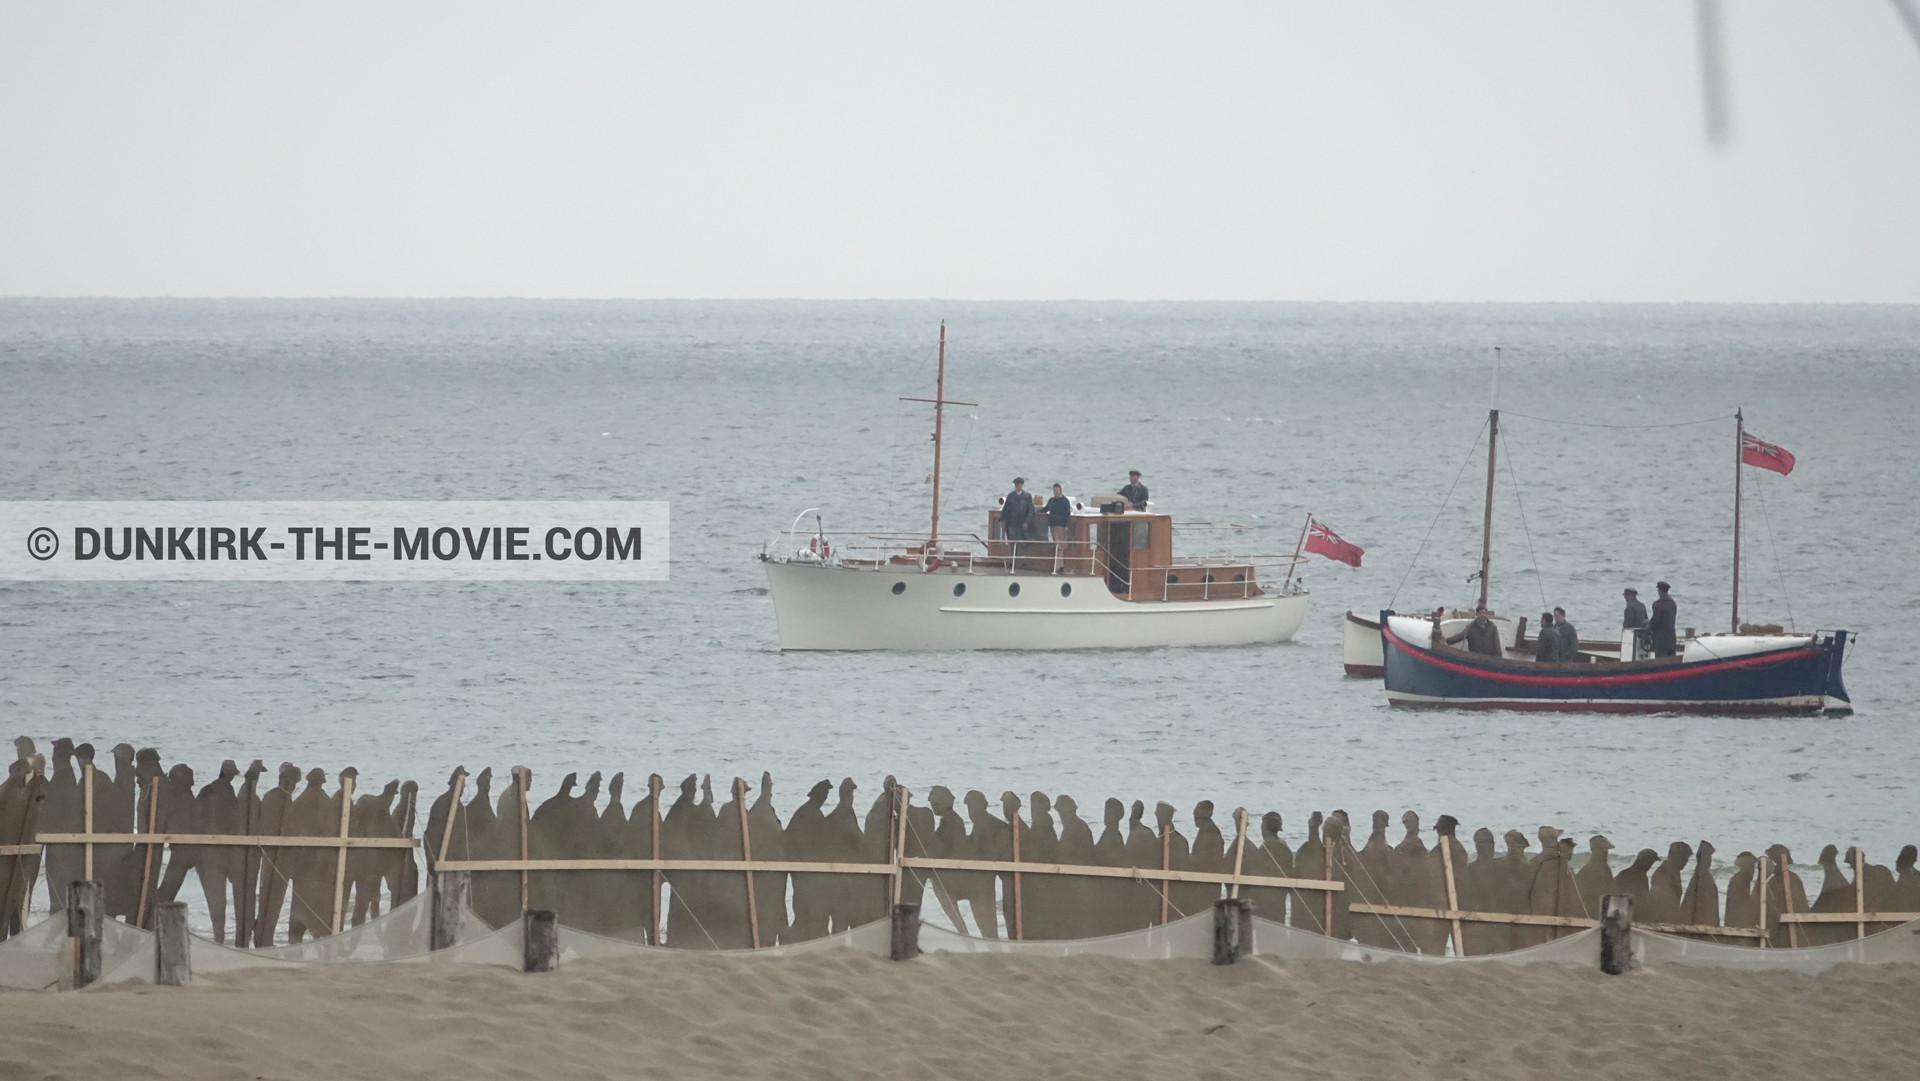 Picture with boat, decor, beach, Henry Finlay lifeboat,  from behind the scene of the Dunkirk movie by Nolan